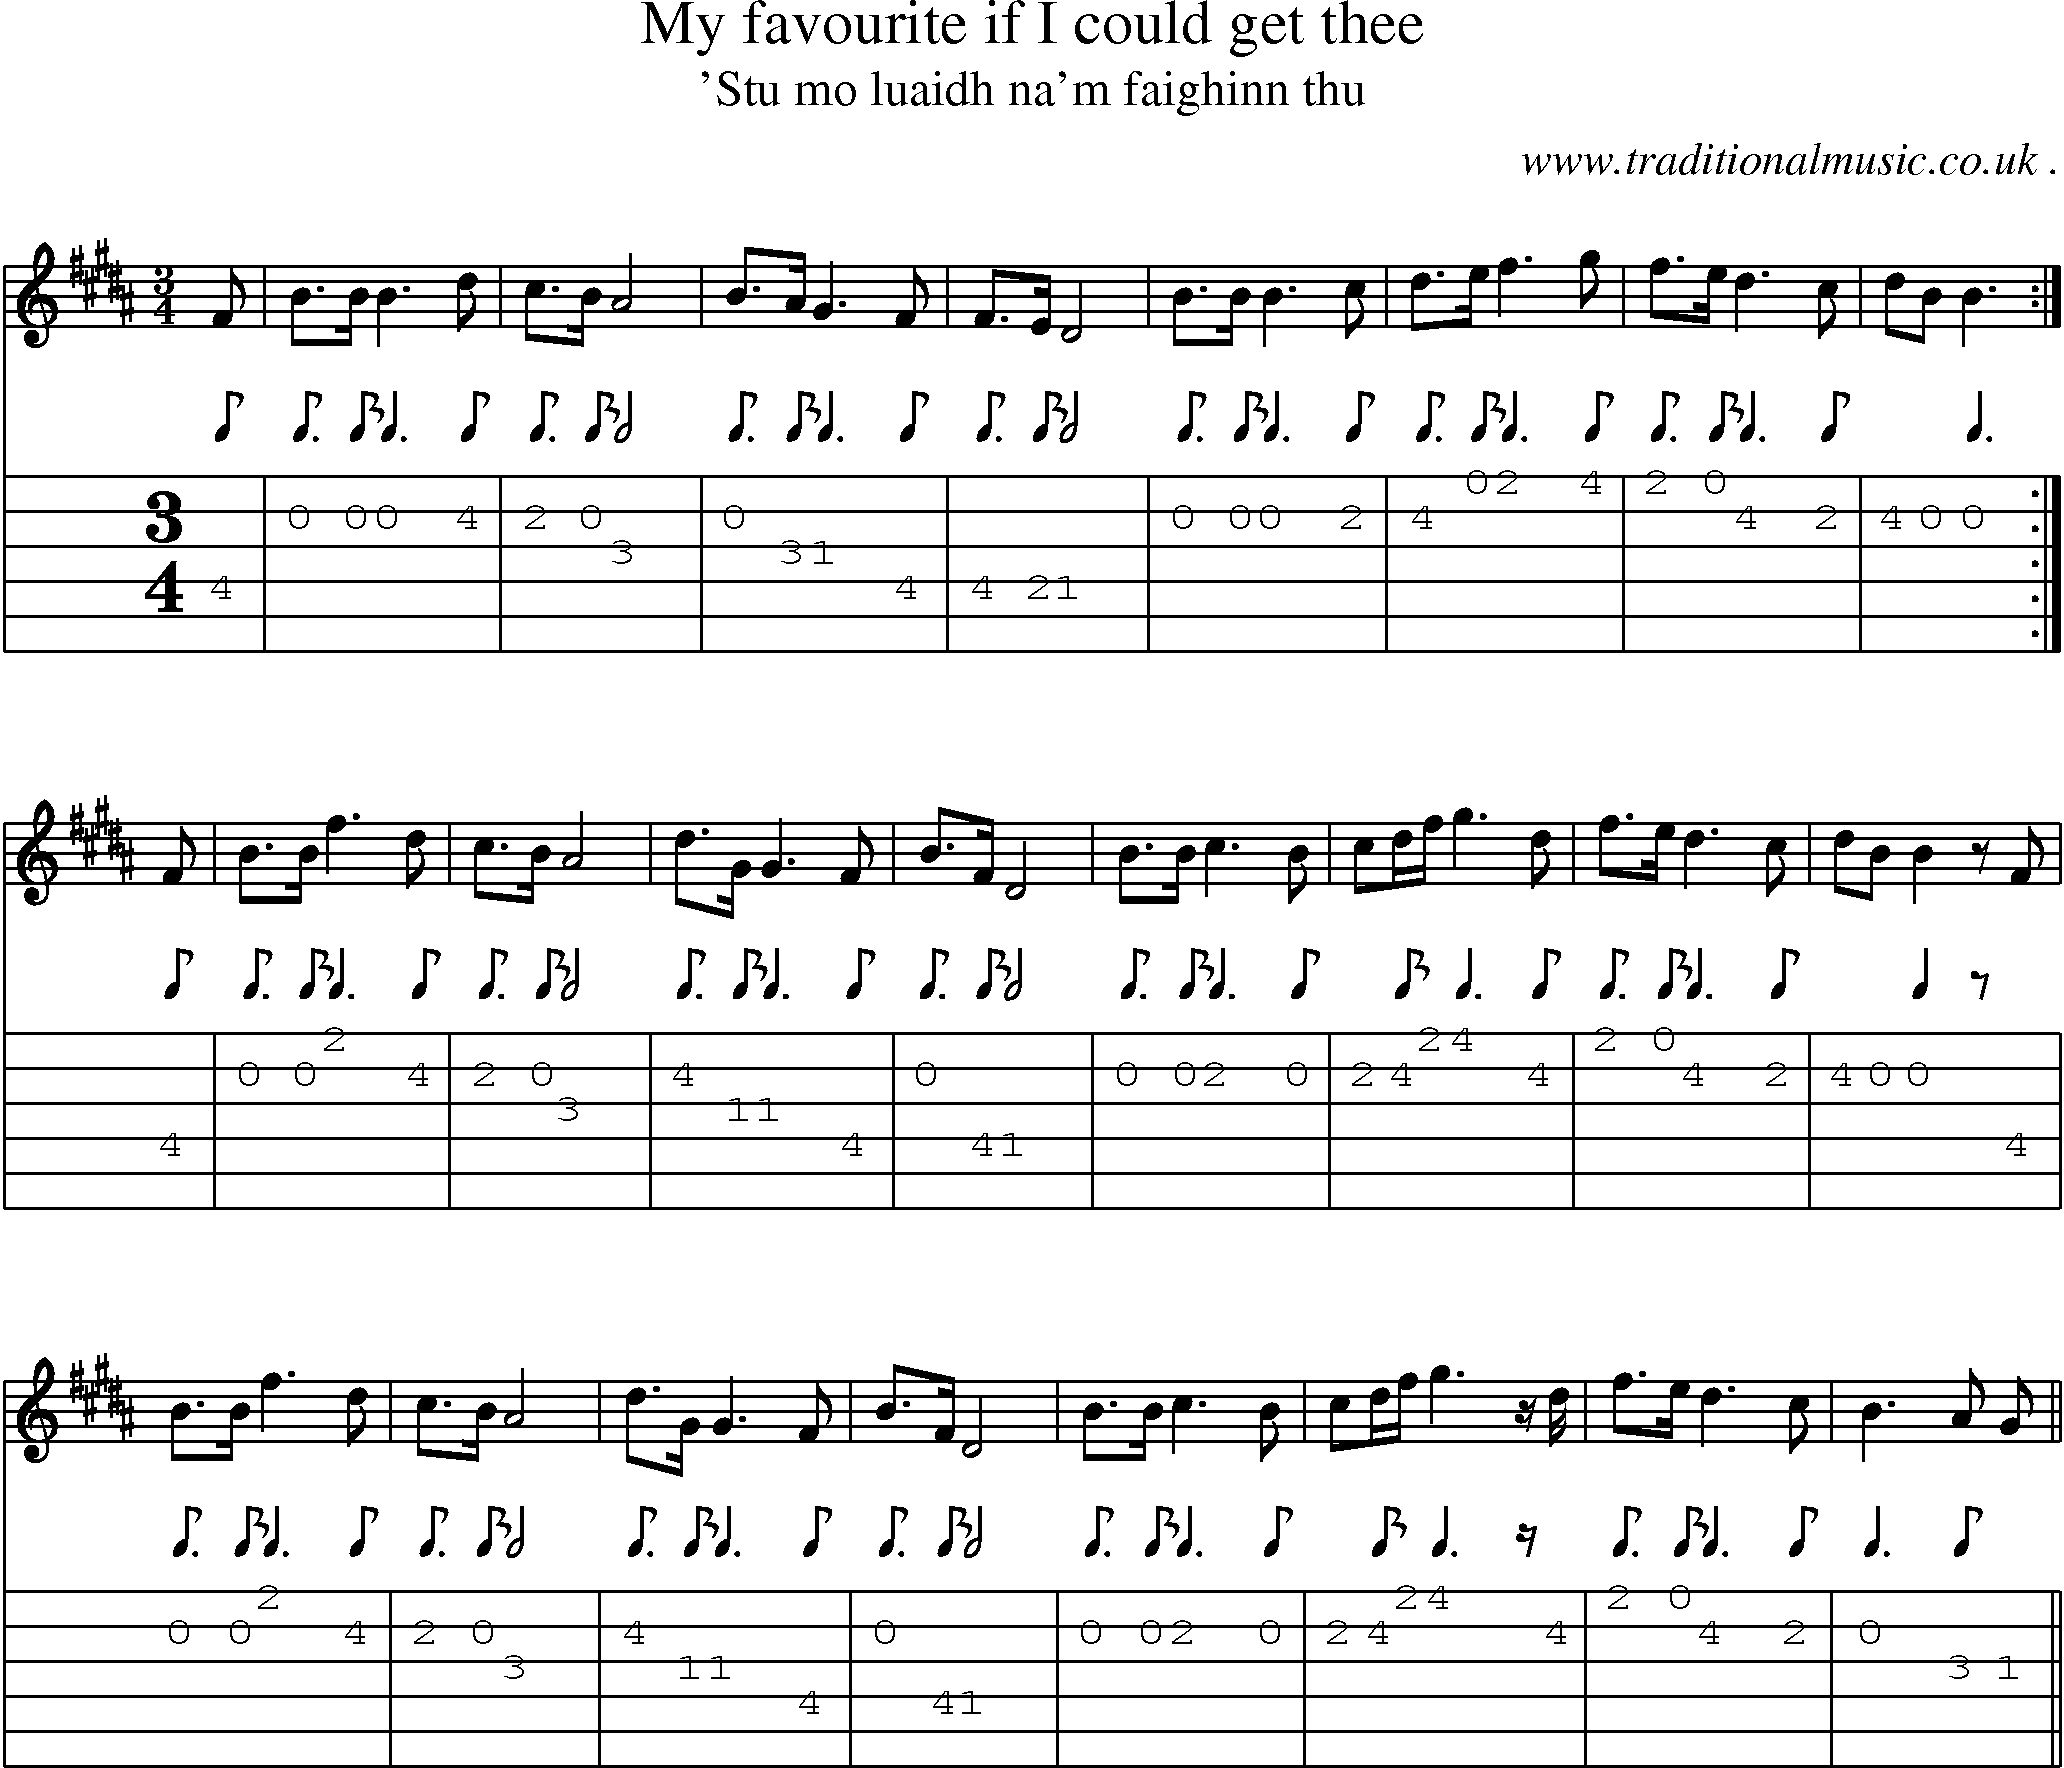 Sheet-music  score, Chords and Guitar Tabs for My Favourite If I Could Get Thee